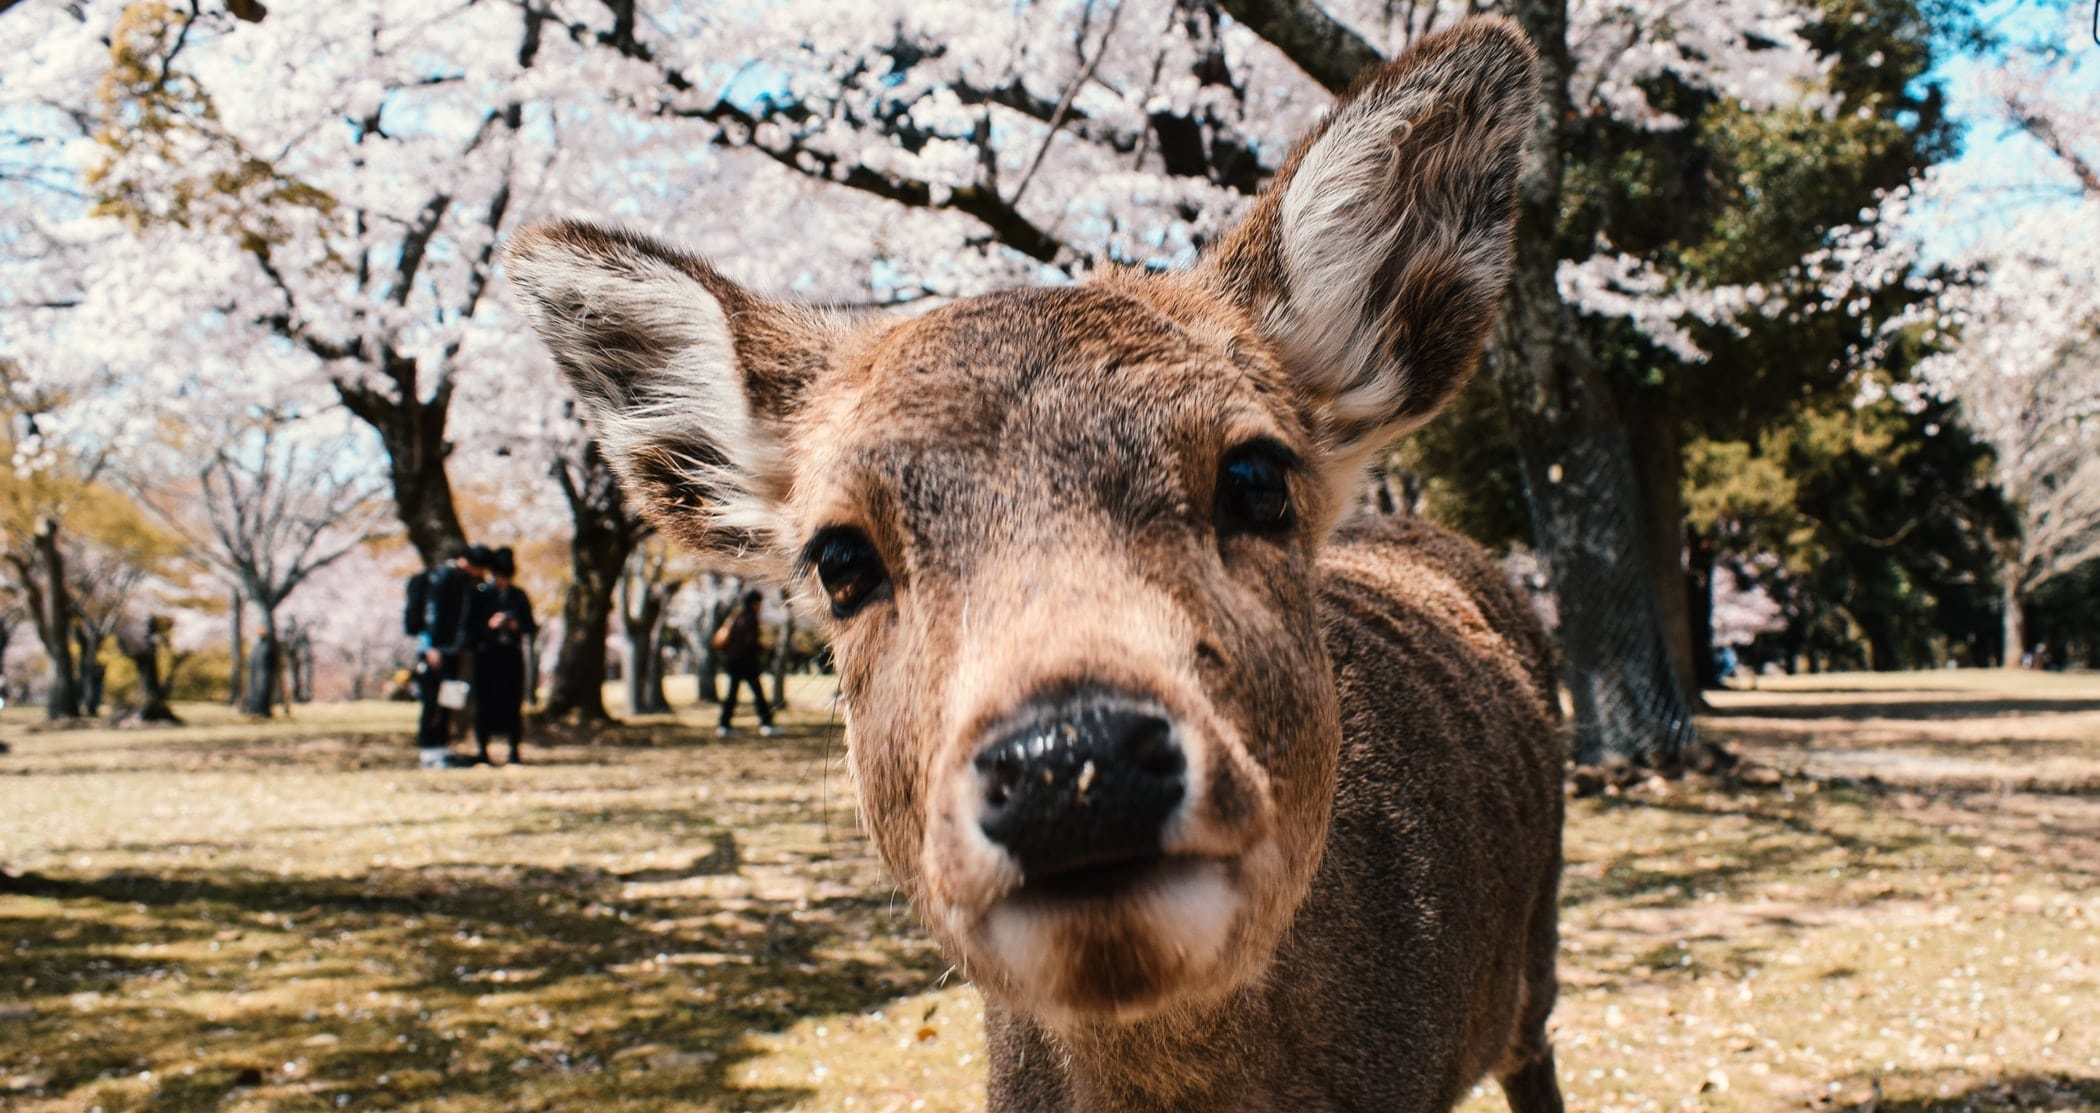 Top 10 things to do in Nara